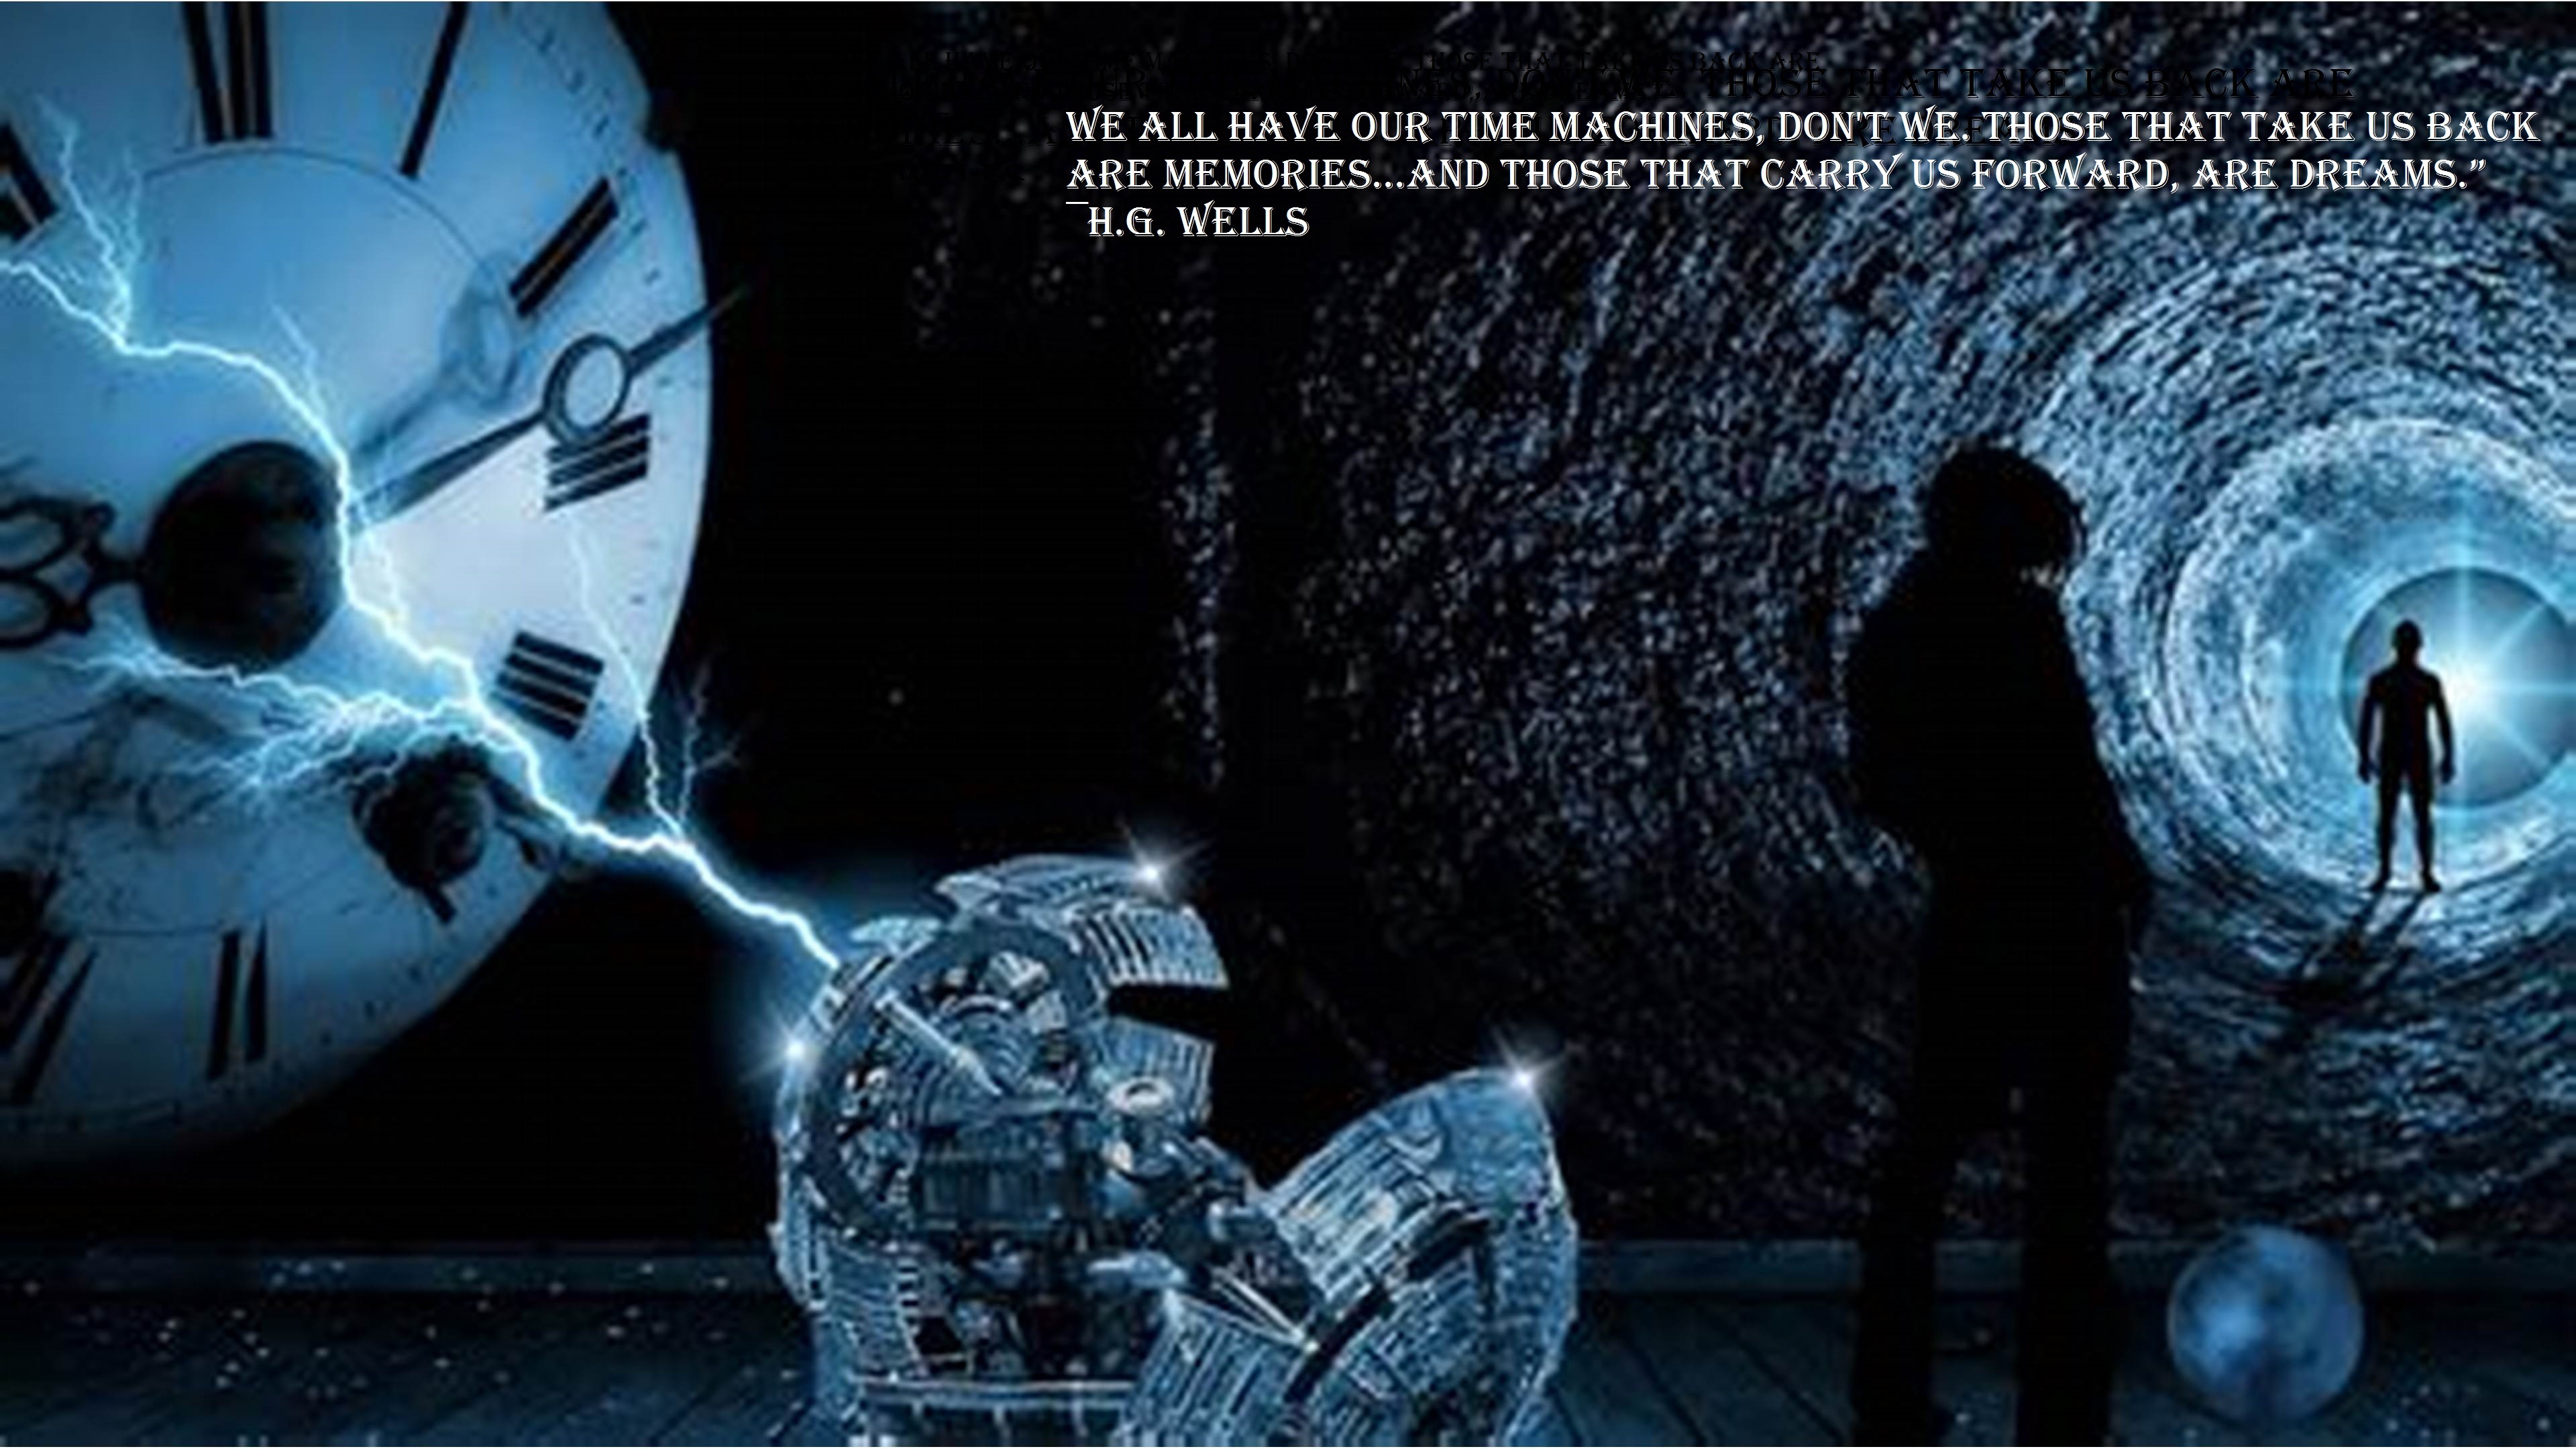 Time Machines, H.G. Wells Quote, RQuotesporn, Time Travel, 3840x2160 4K Desktop